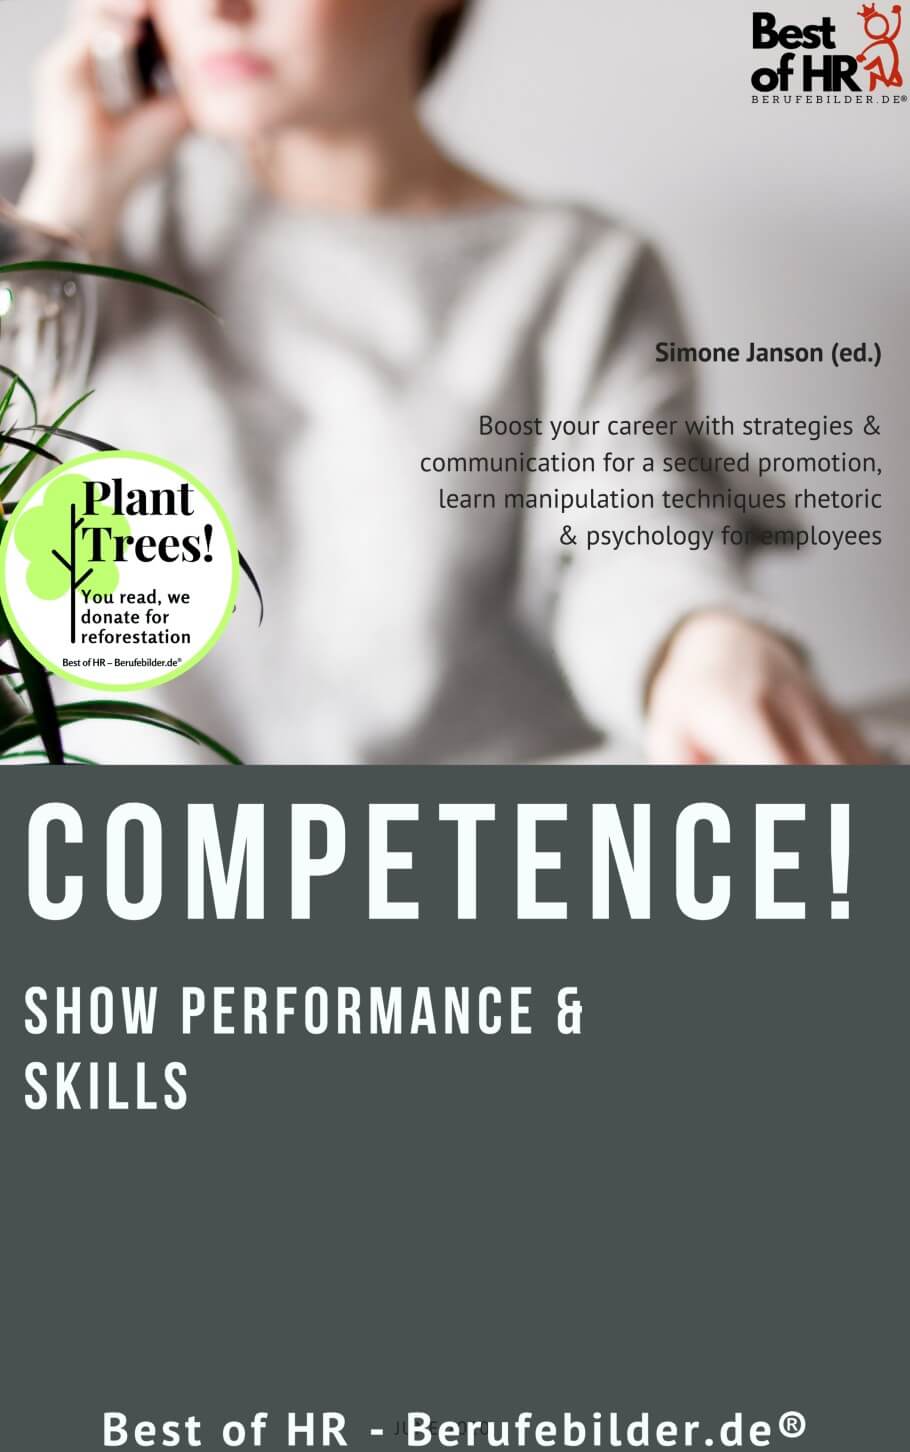 Competence! Show Performance & Skills (Engl. Version)